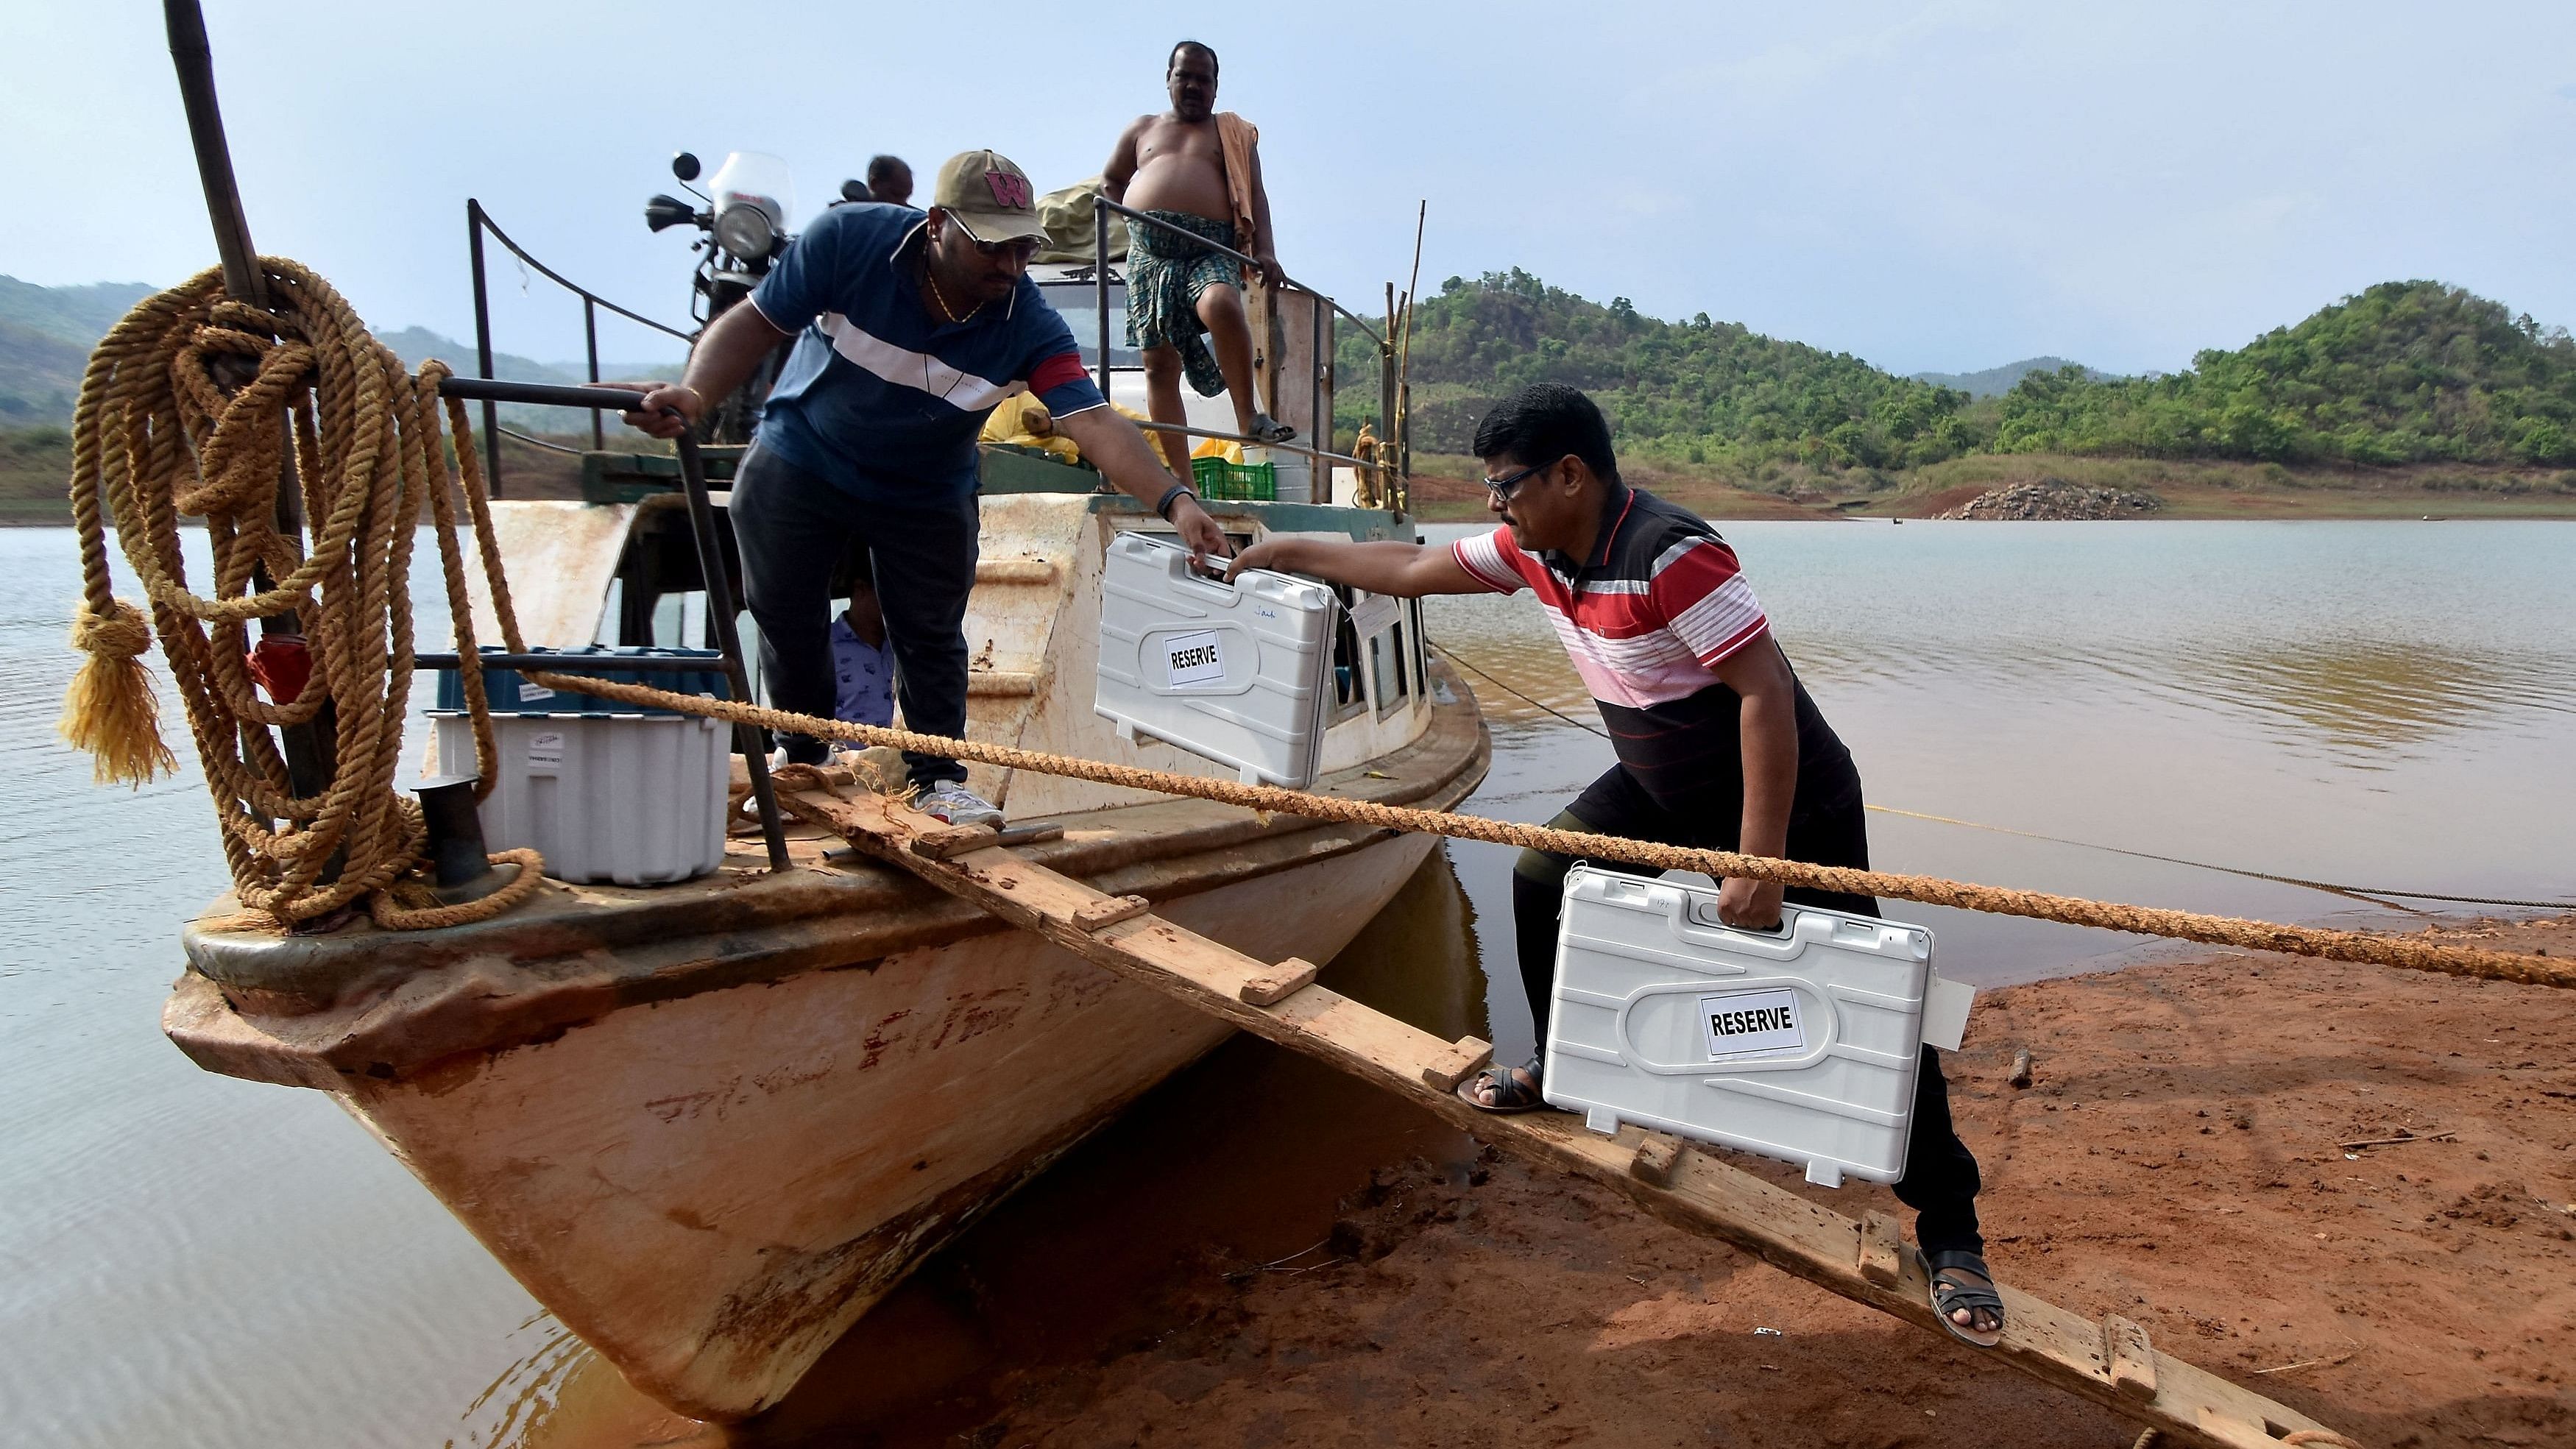 <div class="paragraphs"><p>Polling officials carrying election materials including Electronic Voting Machines (EVM) disembark a ferry upon reaching at their designated polling station in a remote area.</p></div>